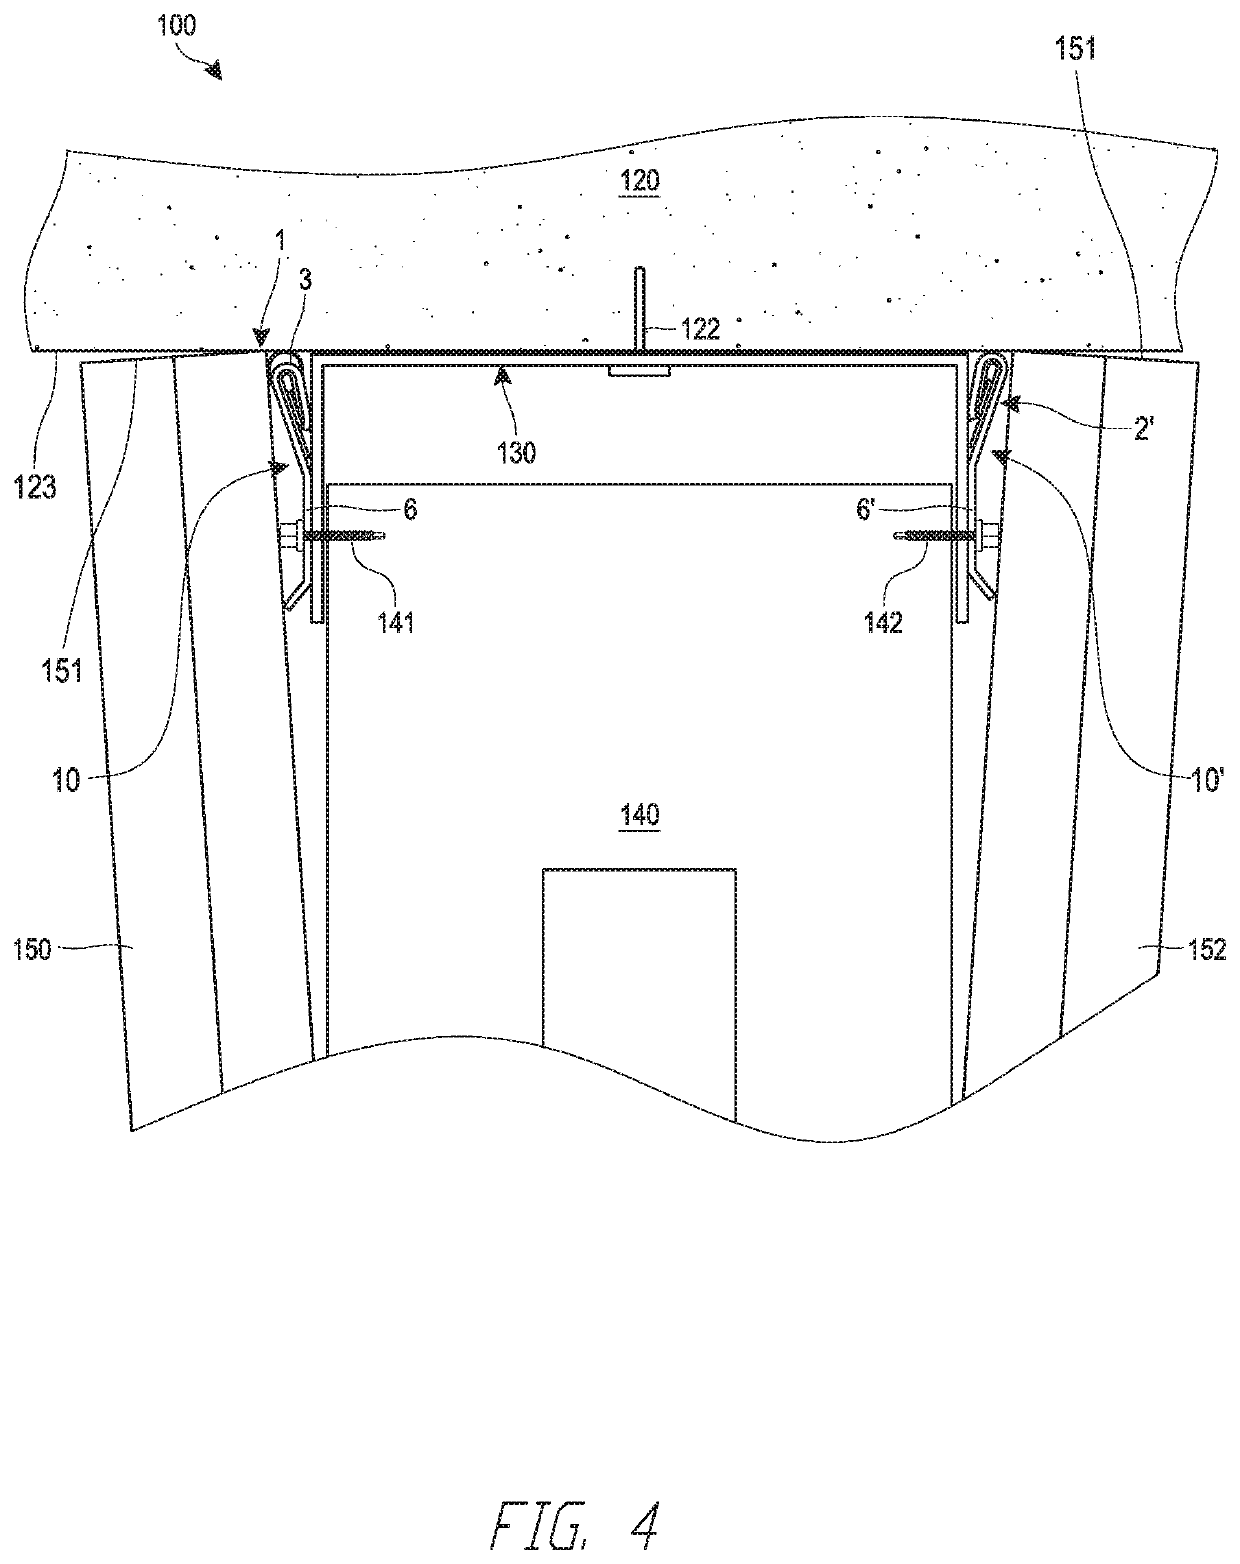 Fire-rated joint component and wall assembly